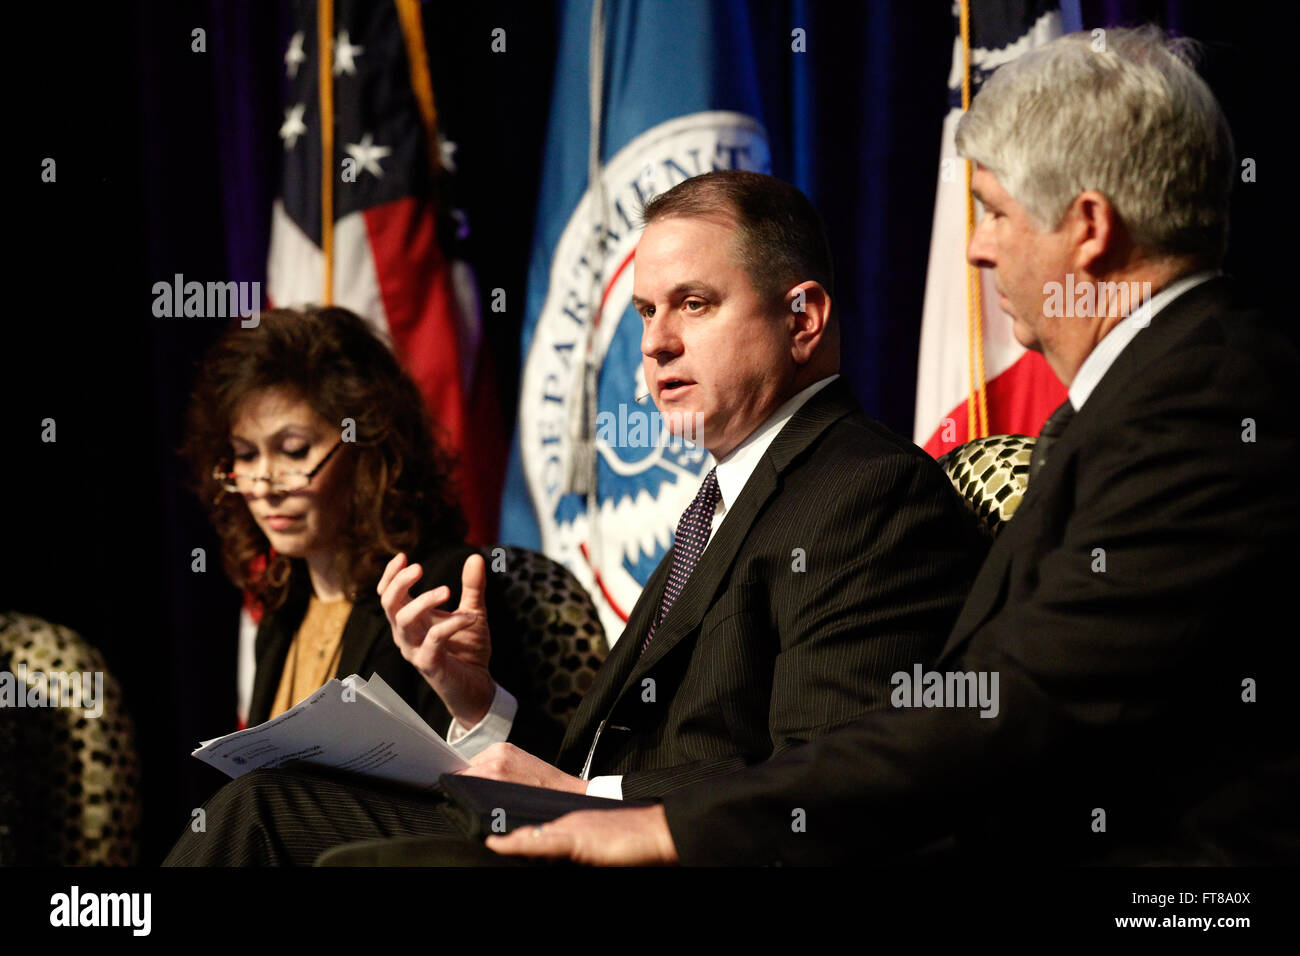 Ted Sherman of Target speaks during a panel discussion titled 'Borders Reimagined' at the 2015 East Coast Trade Symposium held in Baltimore, Md., Nov. 4, 2015. (U.S. Customs and Border Protection Photo by Glenn Fawcett) Stock Photo